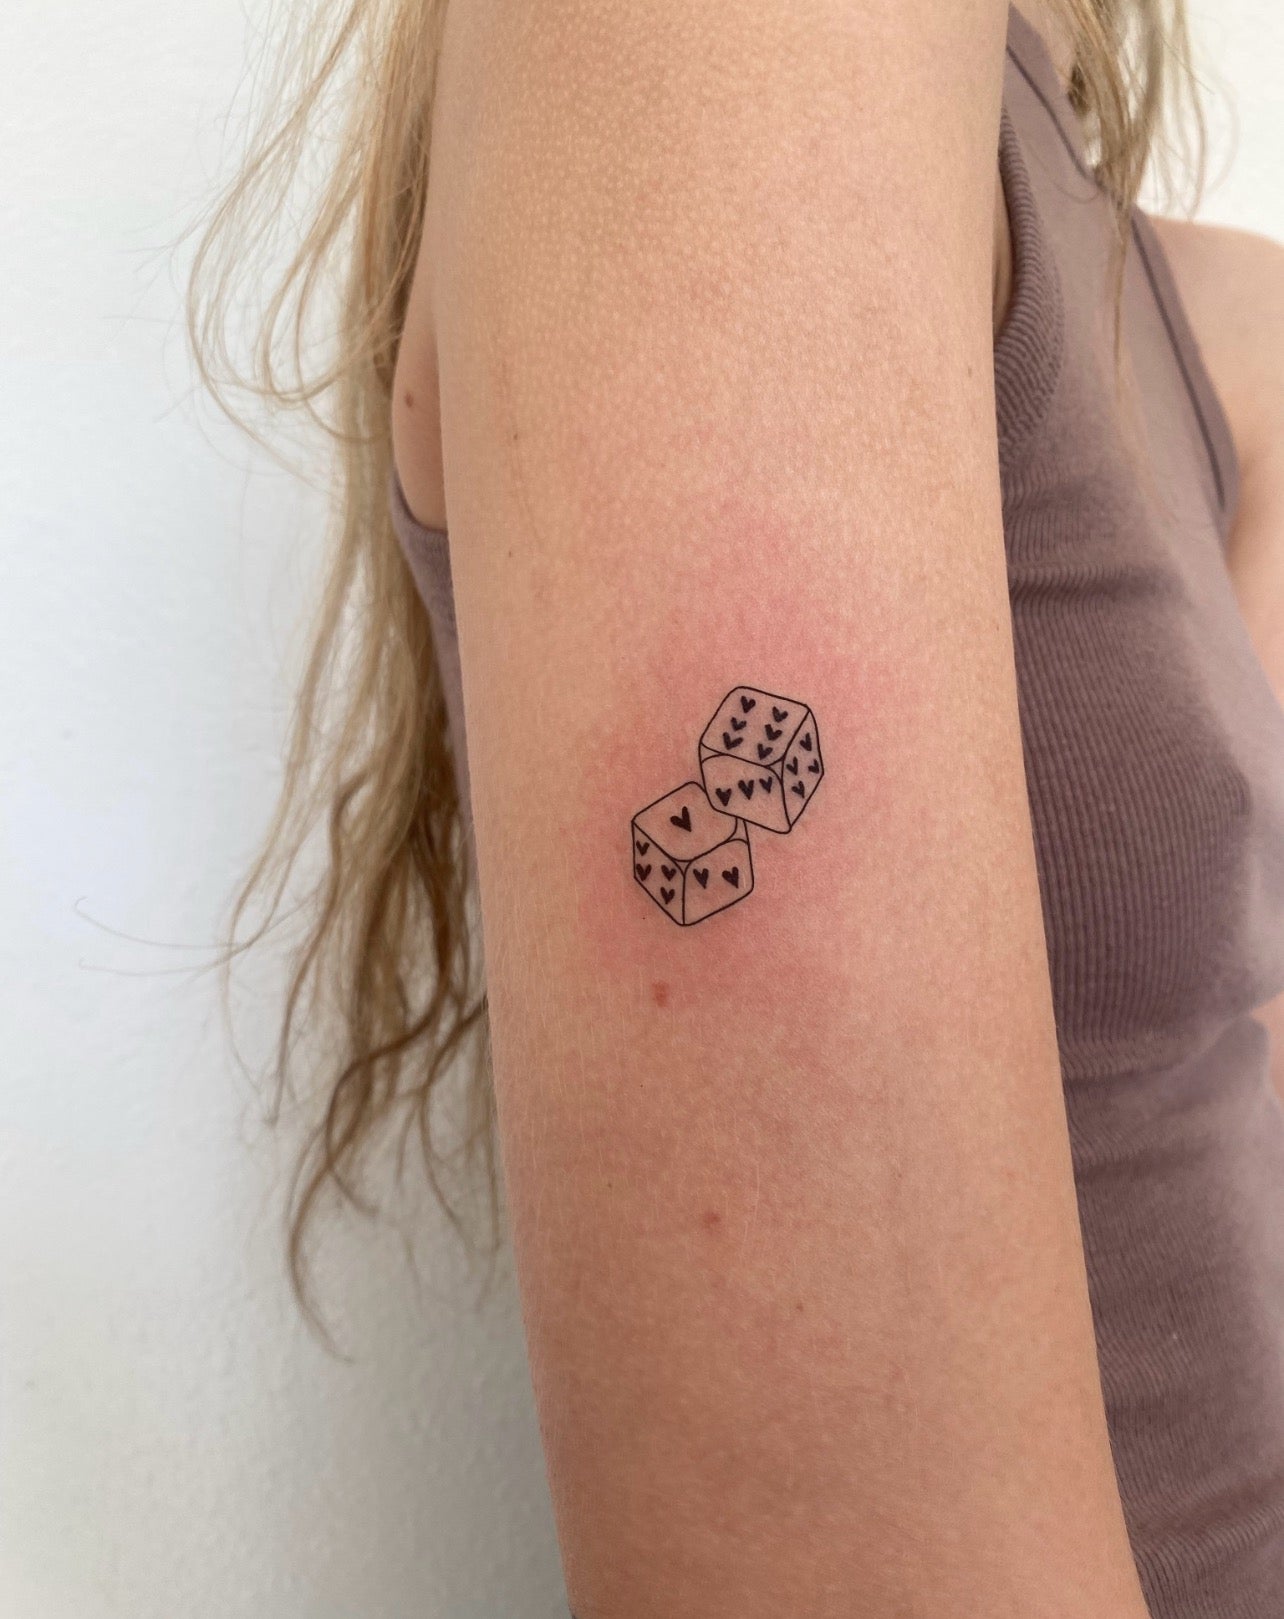 18200 Dice Tattoo Stock Photos Pictures  RoyaltyFree Images  iStock